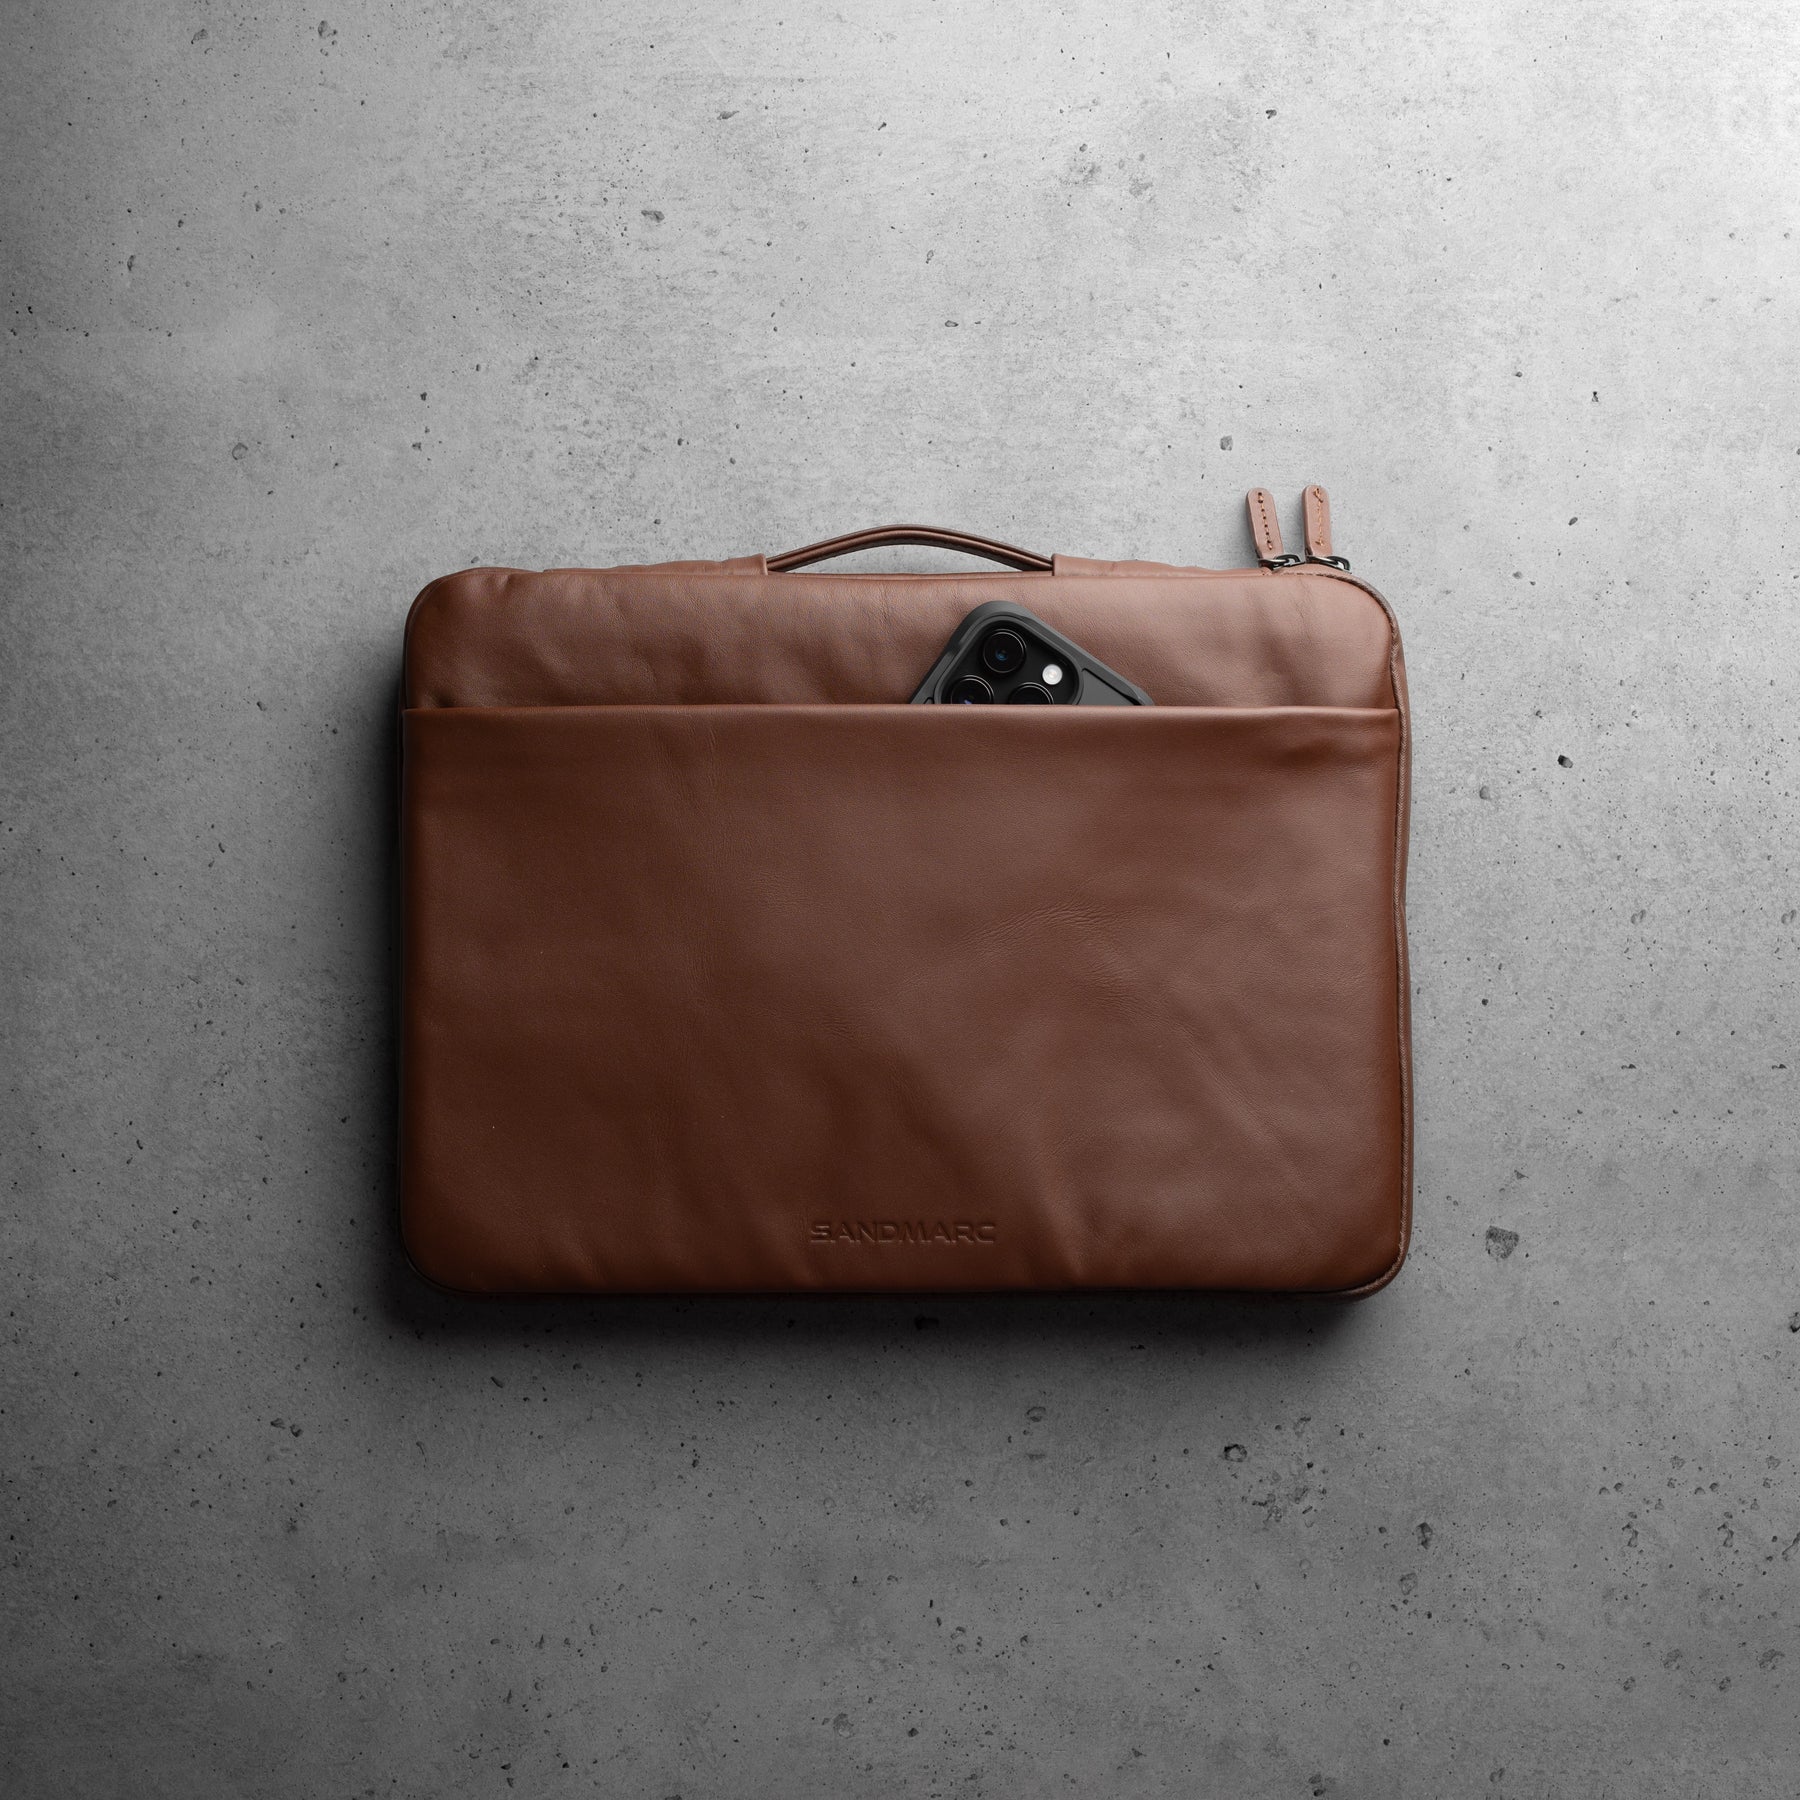 Macbook Pro 14“ Sleeve and Bags